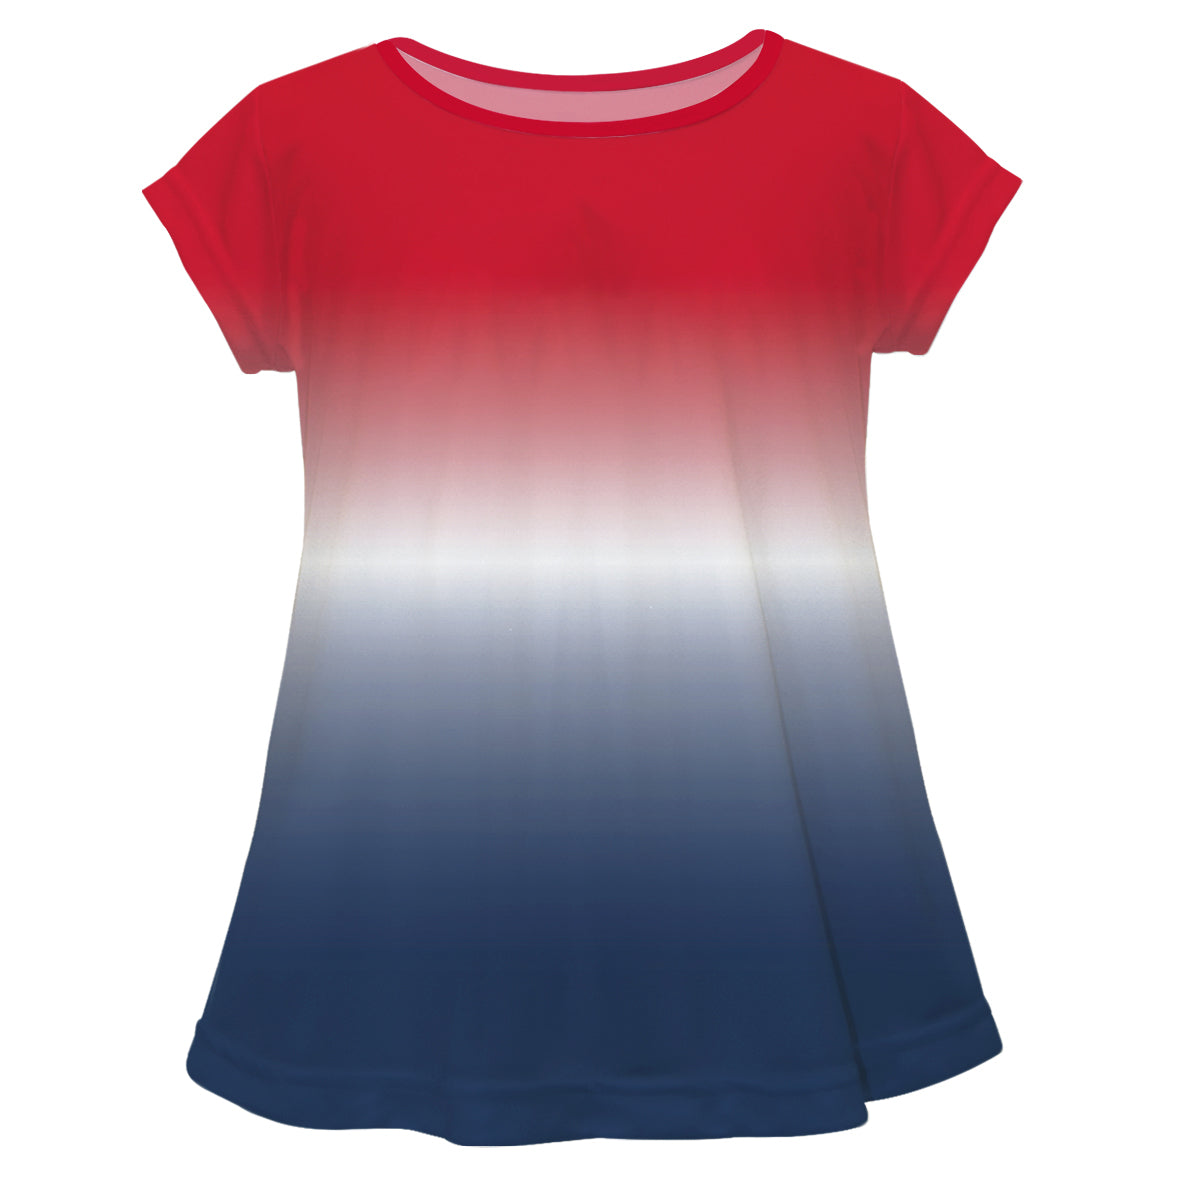 Personalized Name Red and Navy Degrade Short Sleeve Laurie Top - Wimziy&Co.